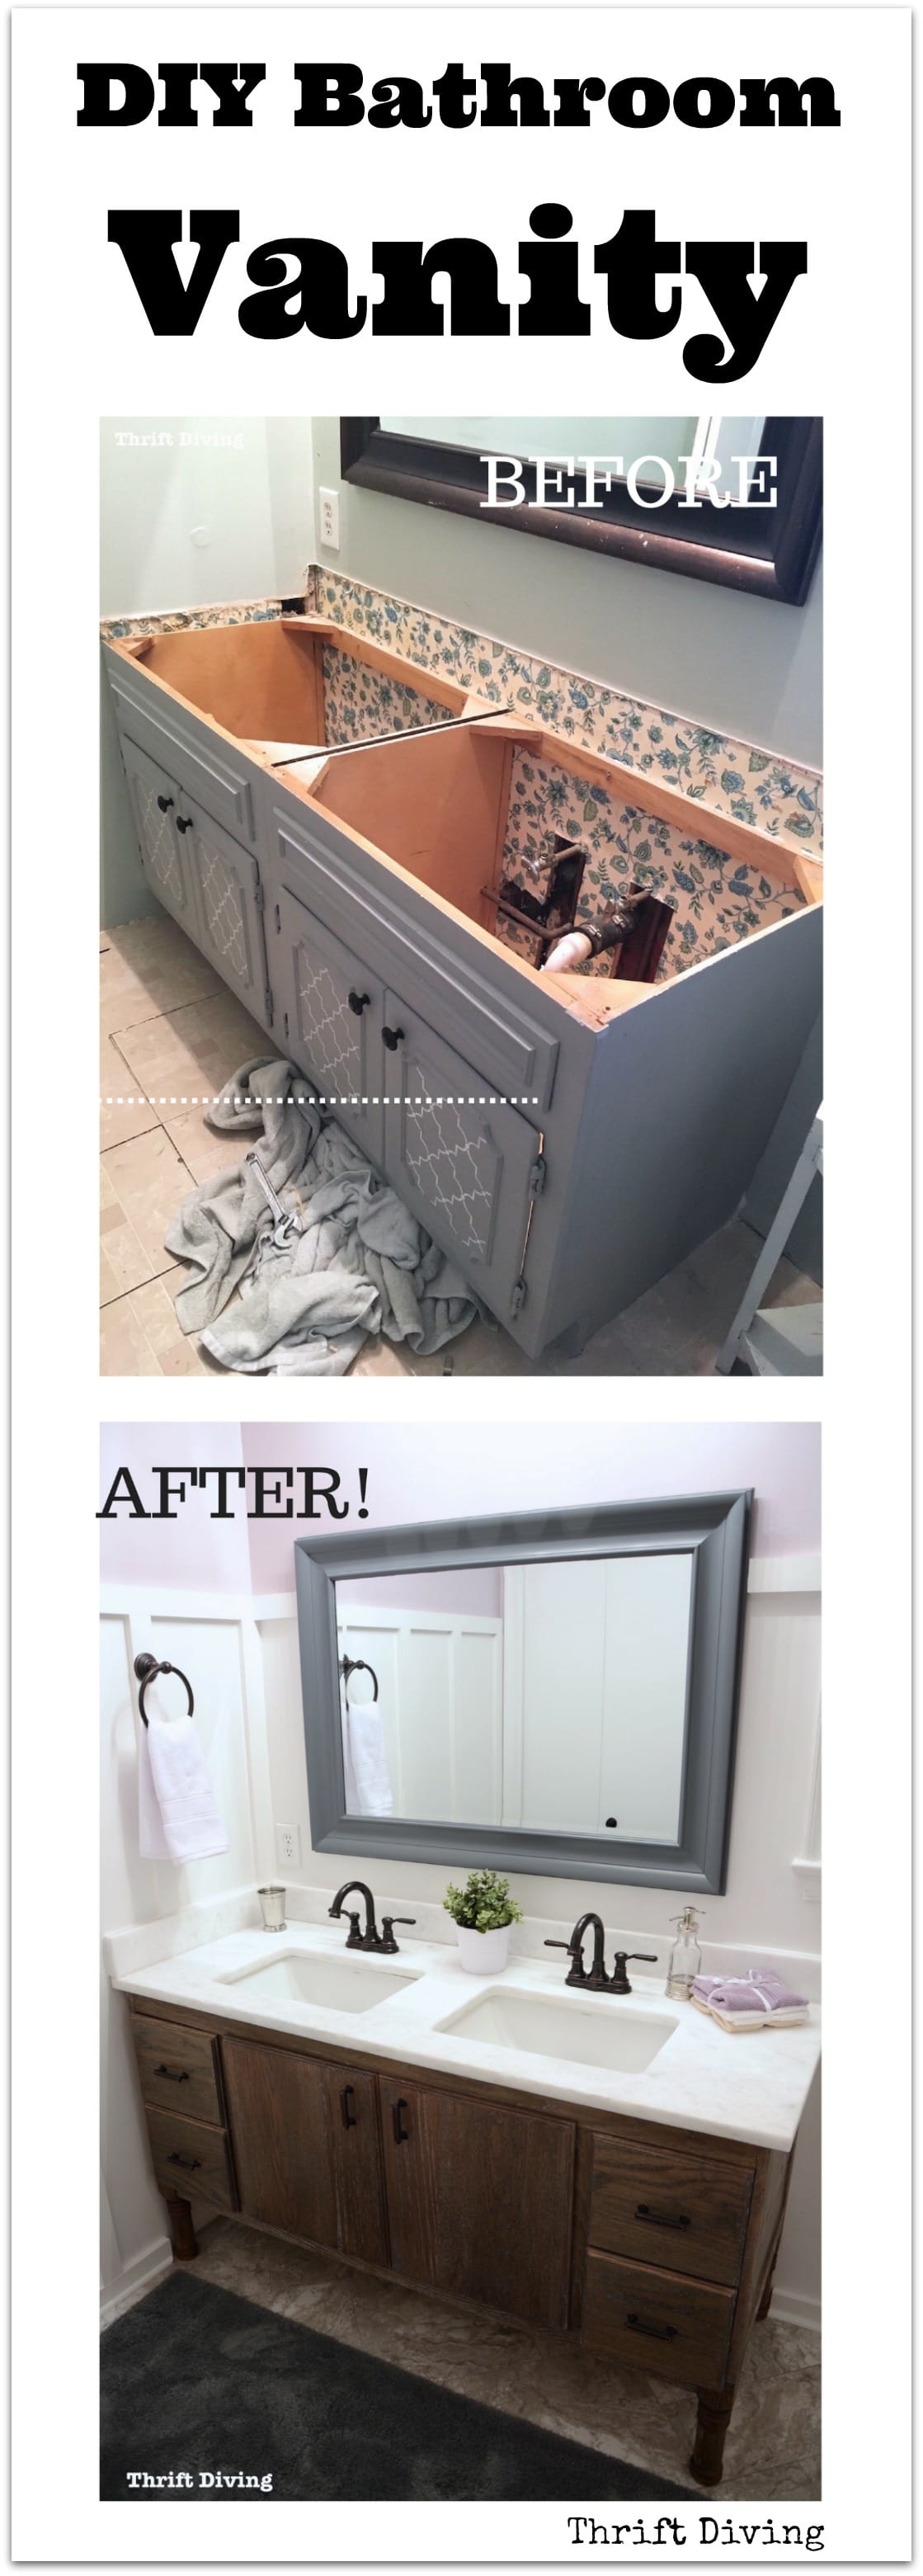 How To Build A 60 Diy Bathroom Vanity From Scratch - How To Make A Bathroom Vanity Fitters Earned